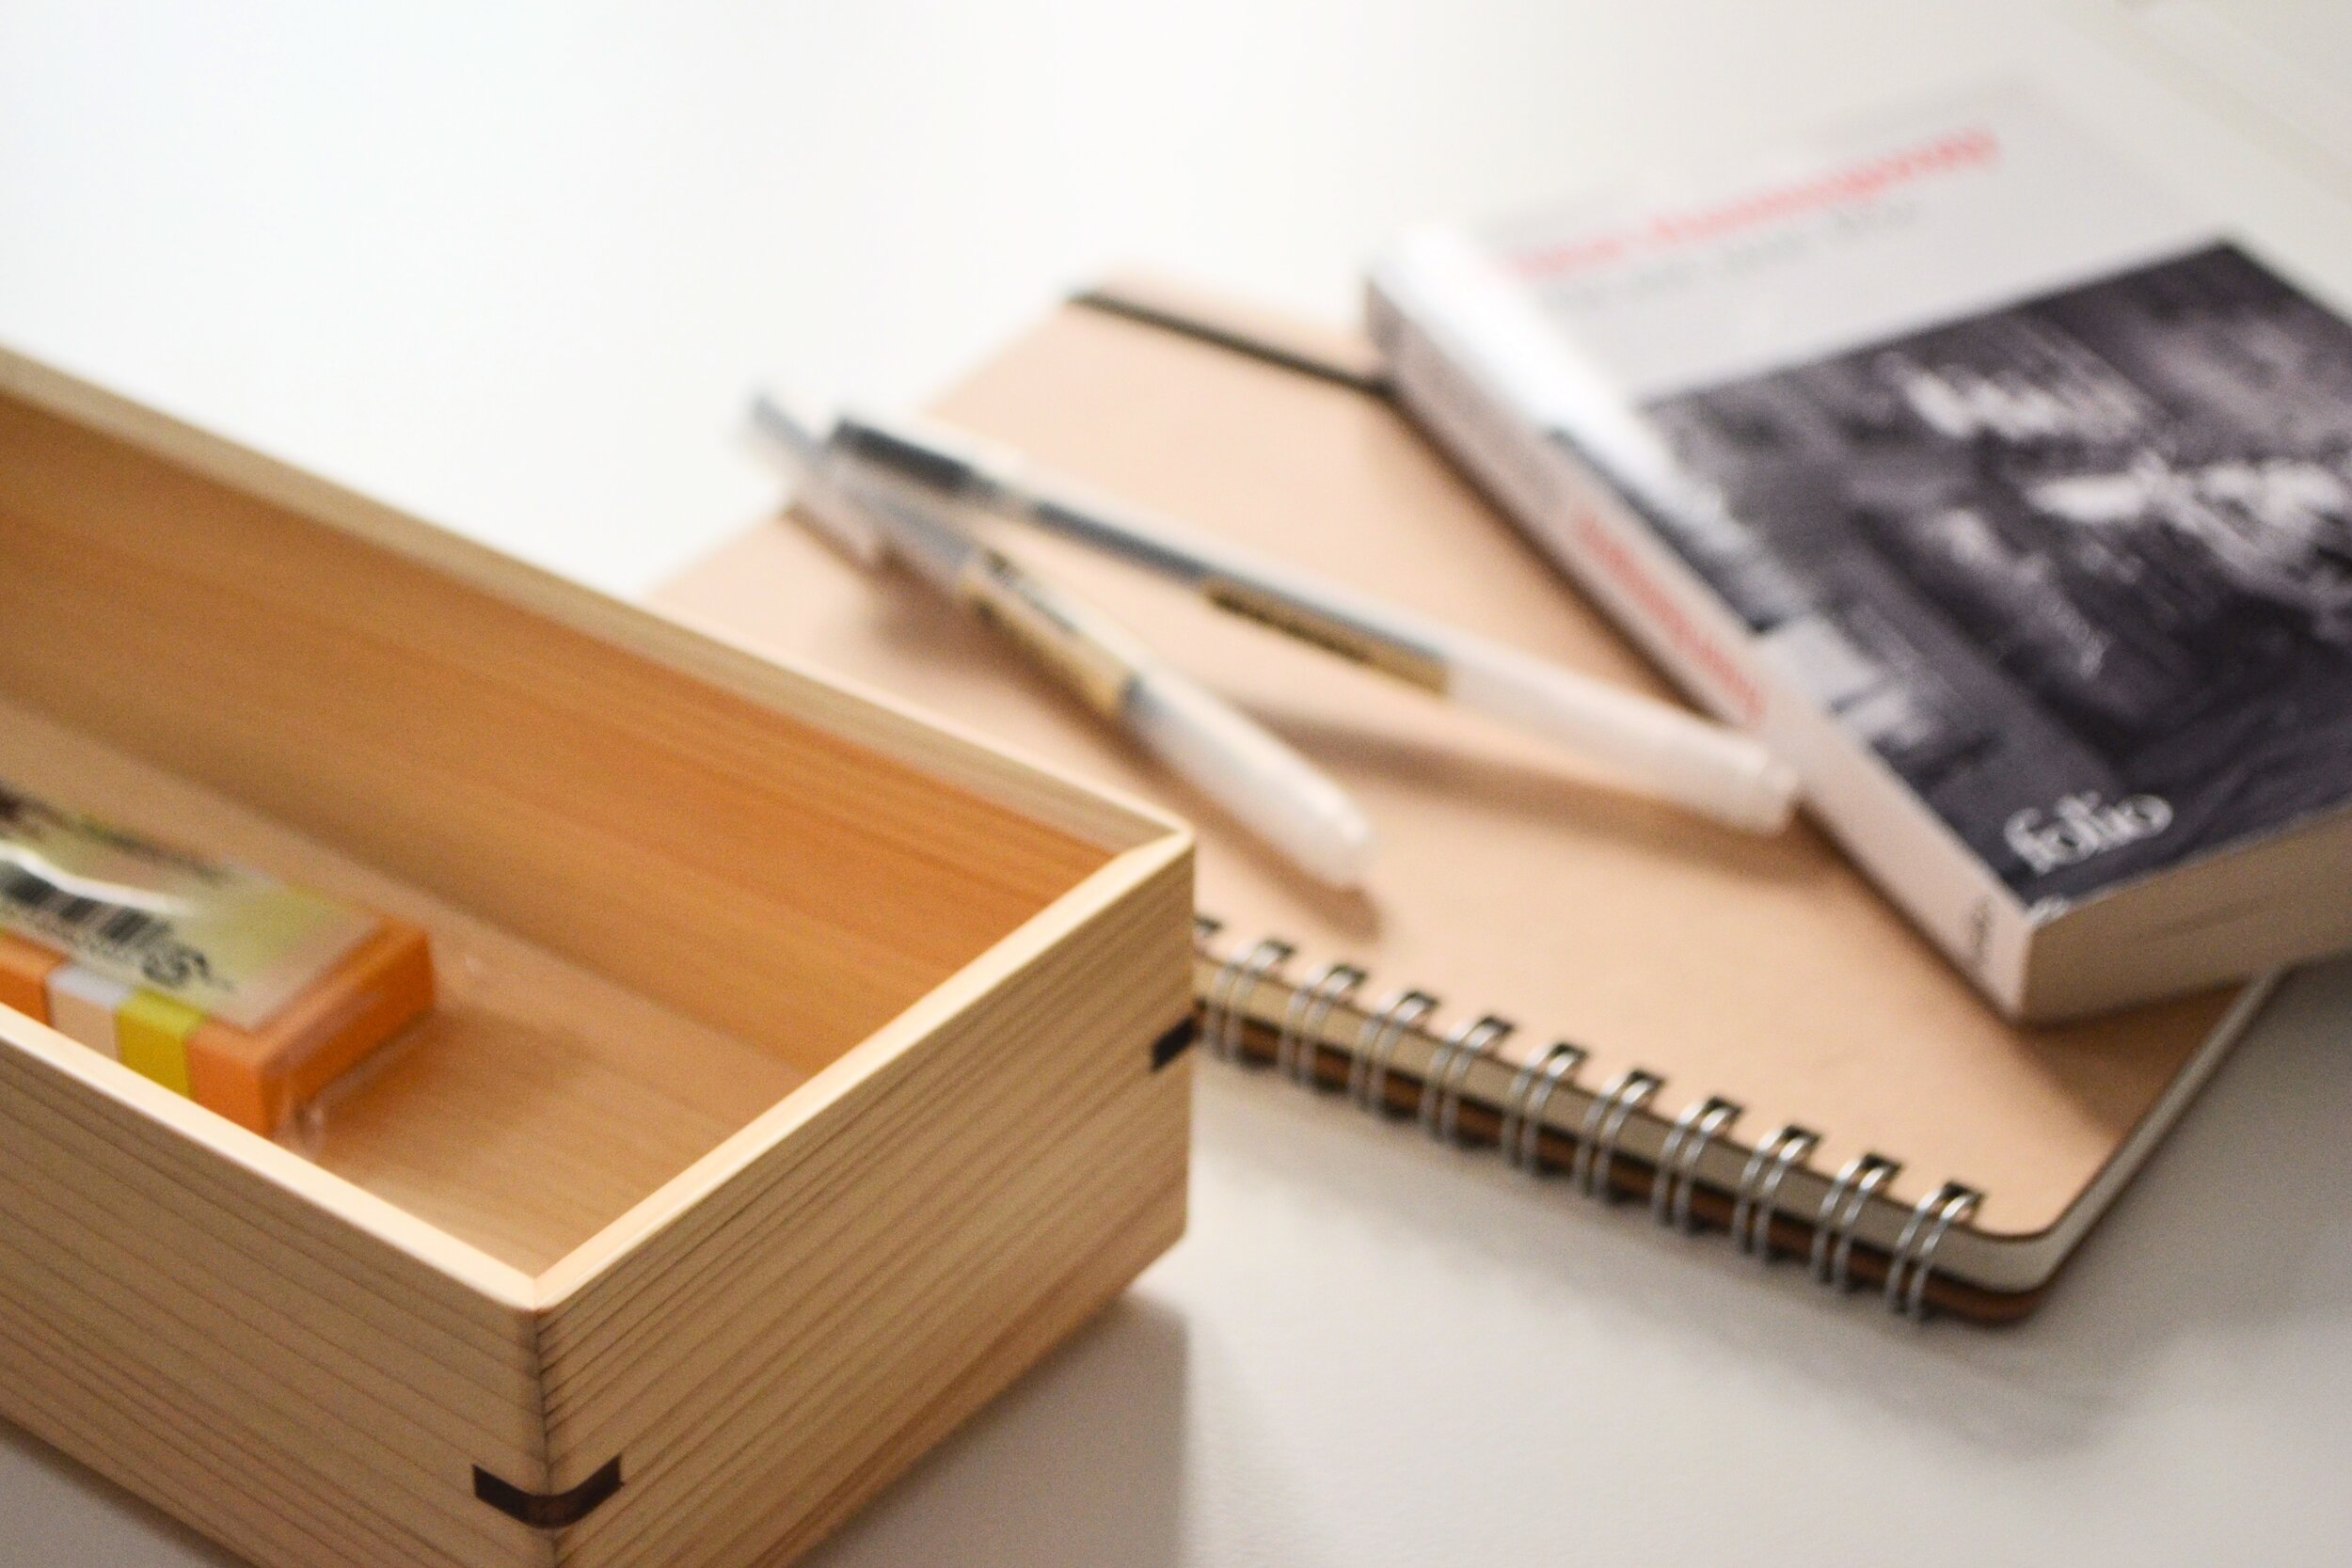 Hako collection - hinoki boxes crafted by Toyooka Craft &amp; designed by Flavien Delbergue for Atelier Takumi (copie)